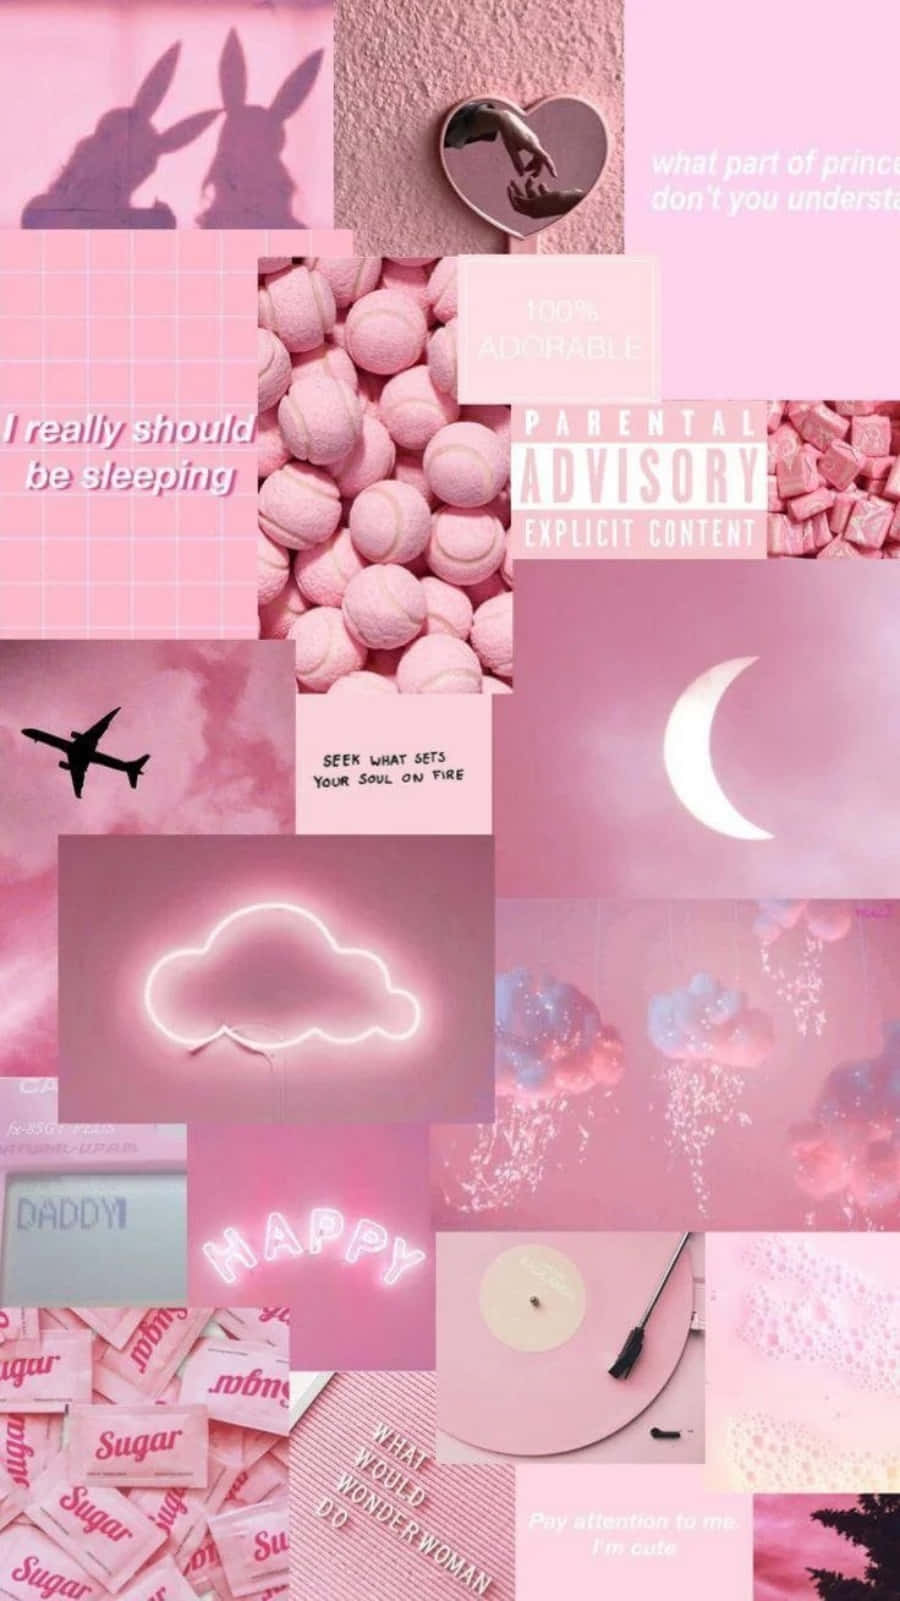 Aesthetic pink vibes